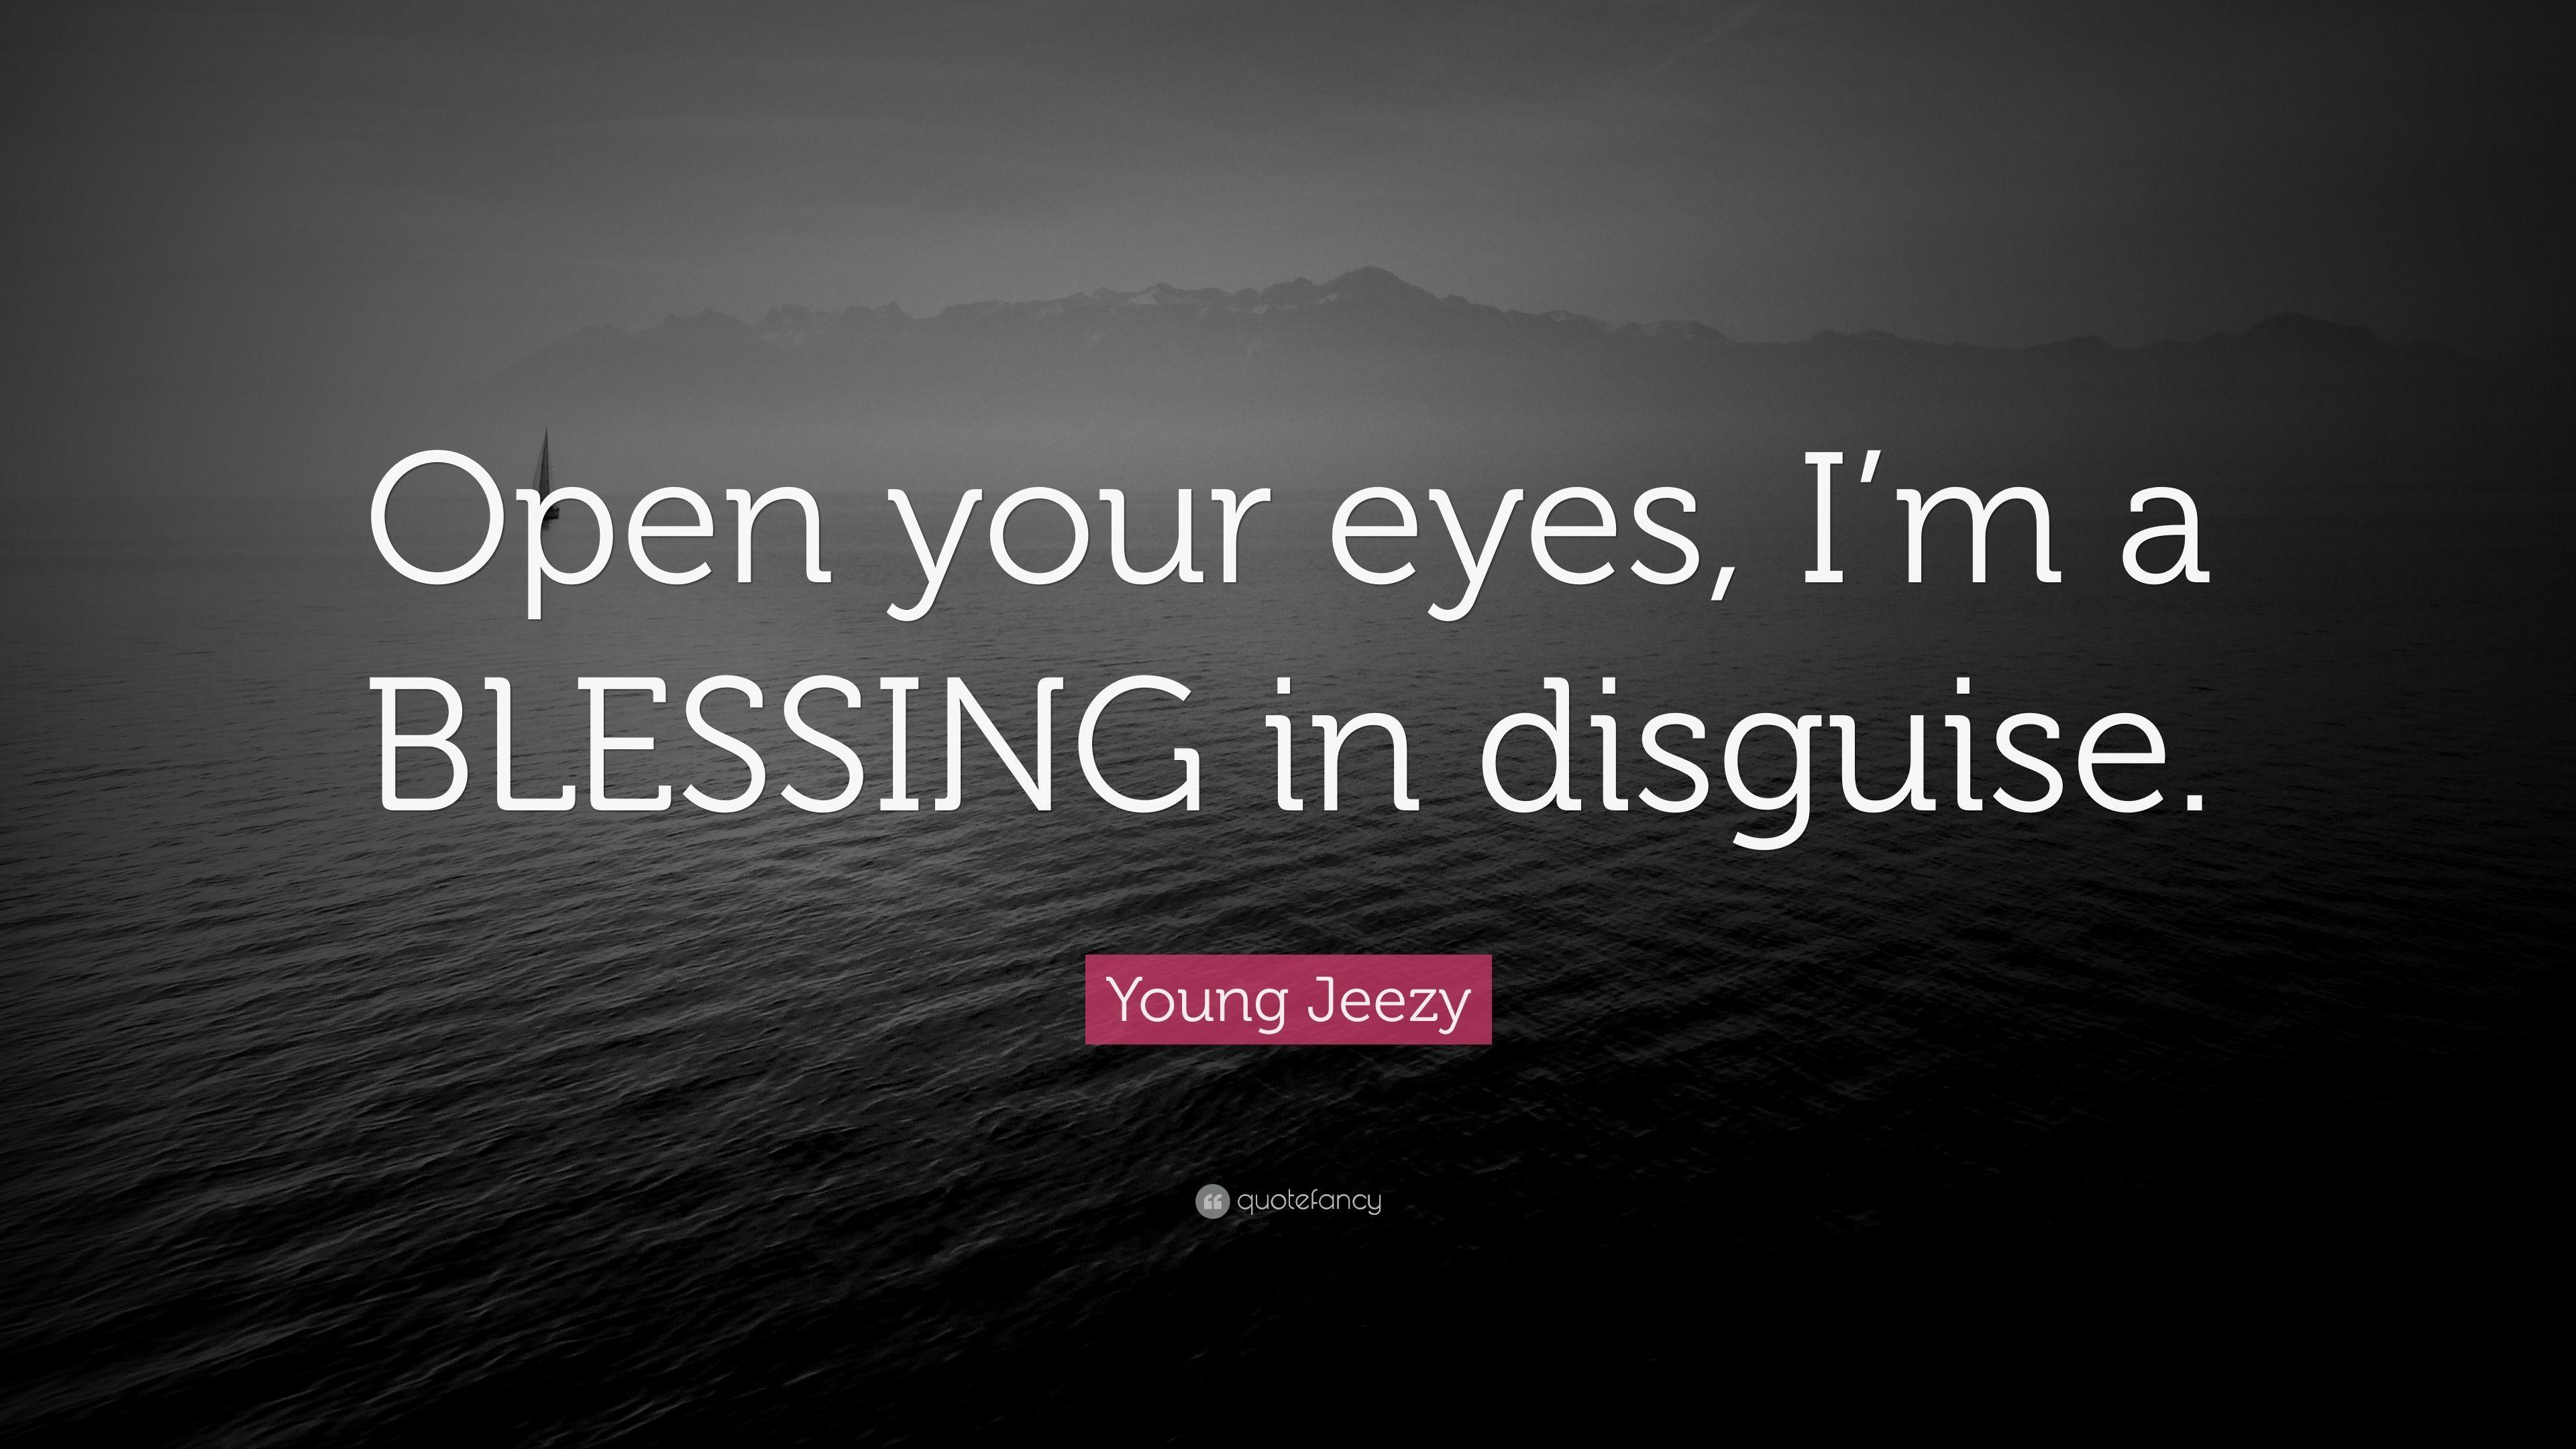 Young Jeezy Quote: “Open your eyes, I'm a BLESSING in disguise.” 7